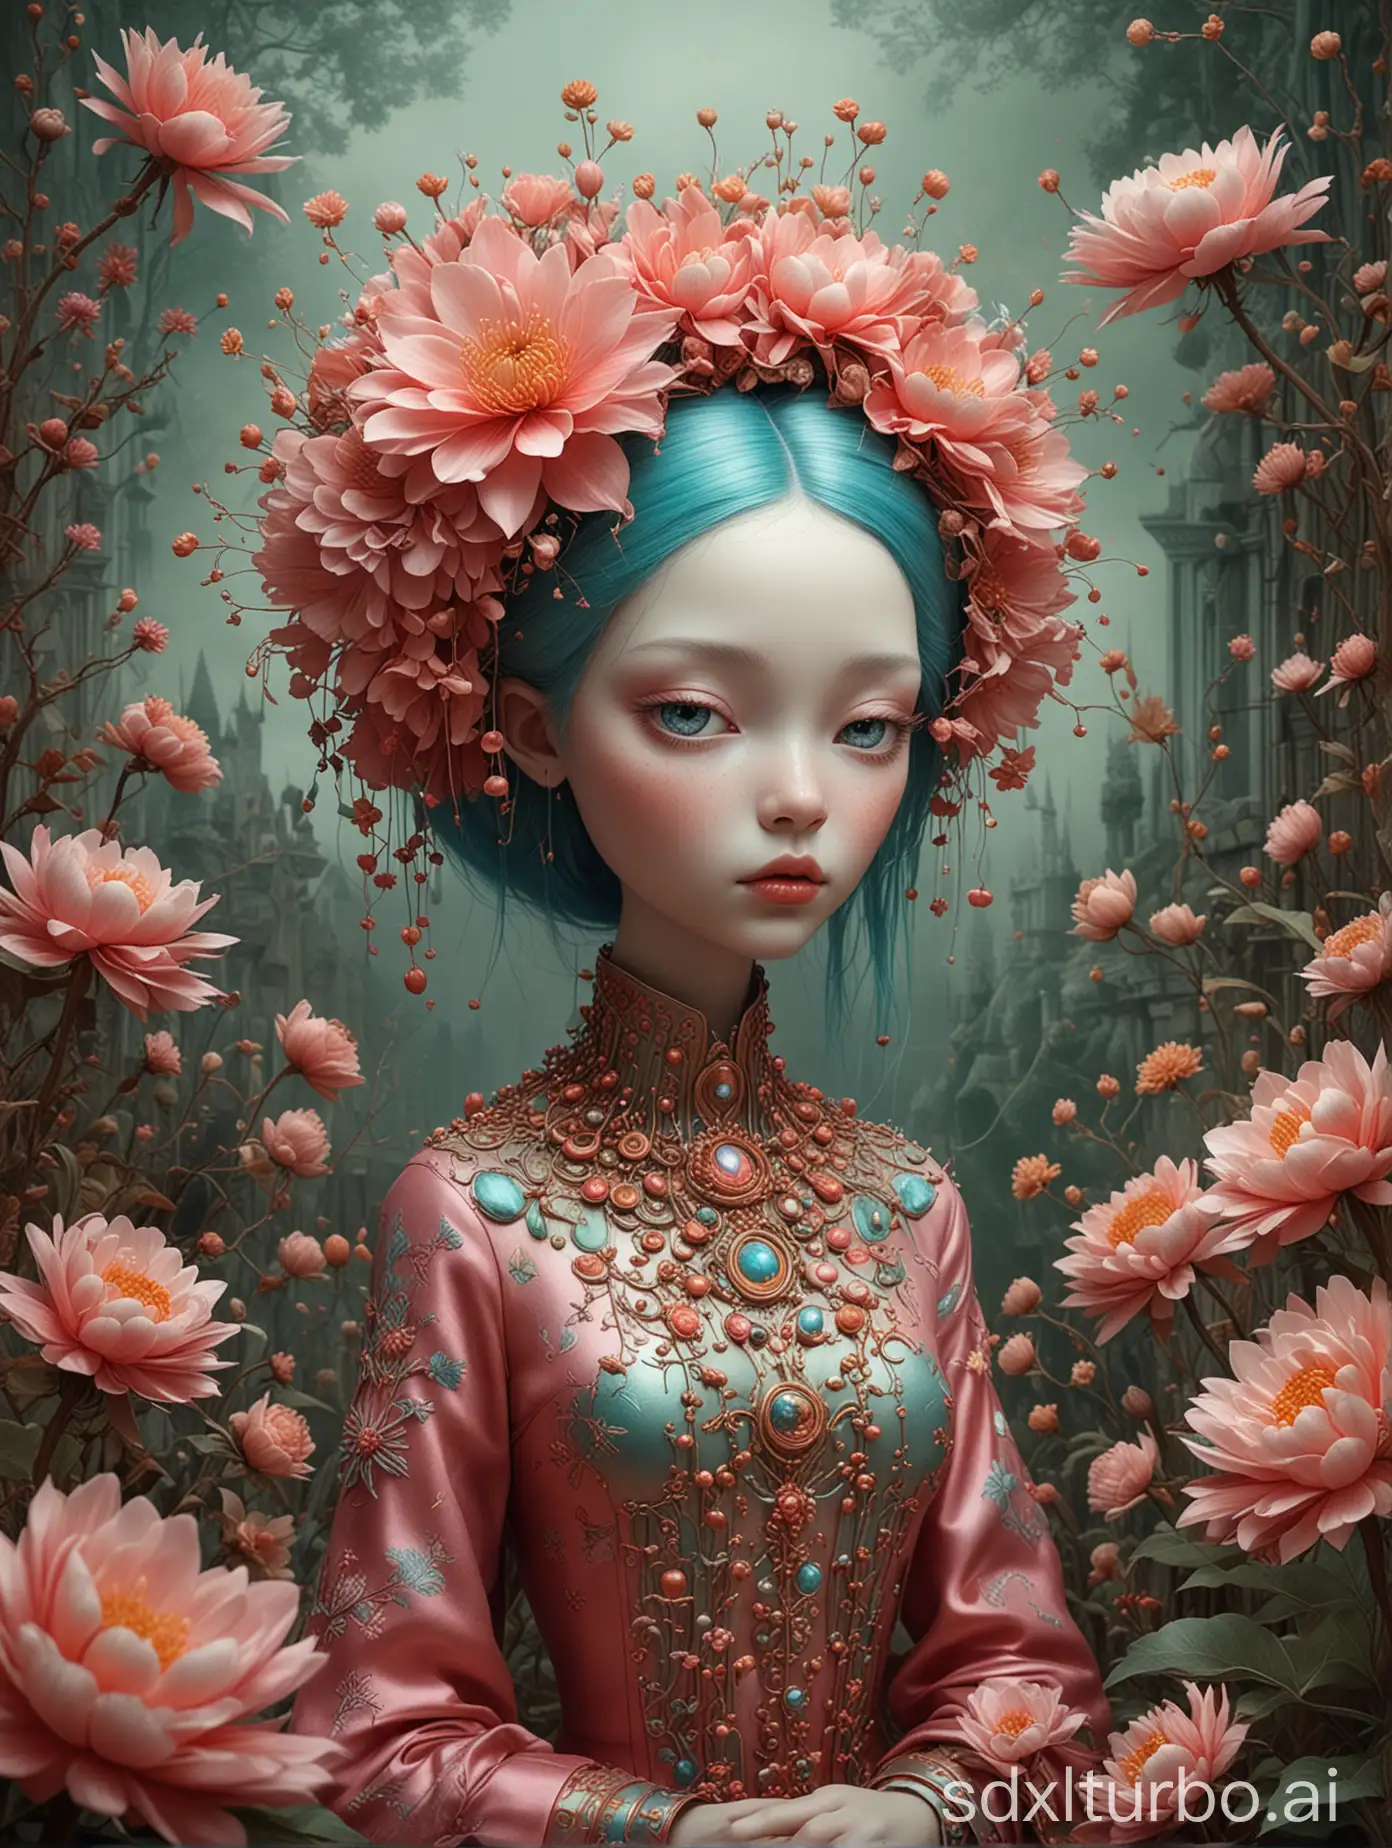 Mesmerizing blossom, acid druid metallic elements blending, styles of Nicoletta Ceccoli and Alberto Varanda, vibrant colors, intricate details, visual feast, captivated by unique artistic styles, beauty and wonder, surreal landscape, digital painting, ultra fine, vivid colors, dramatic lighting